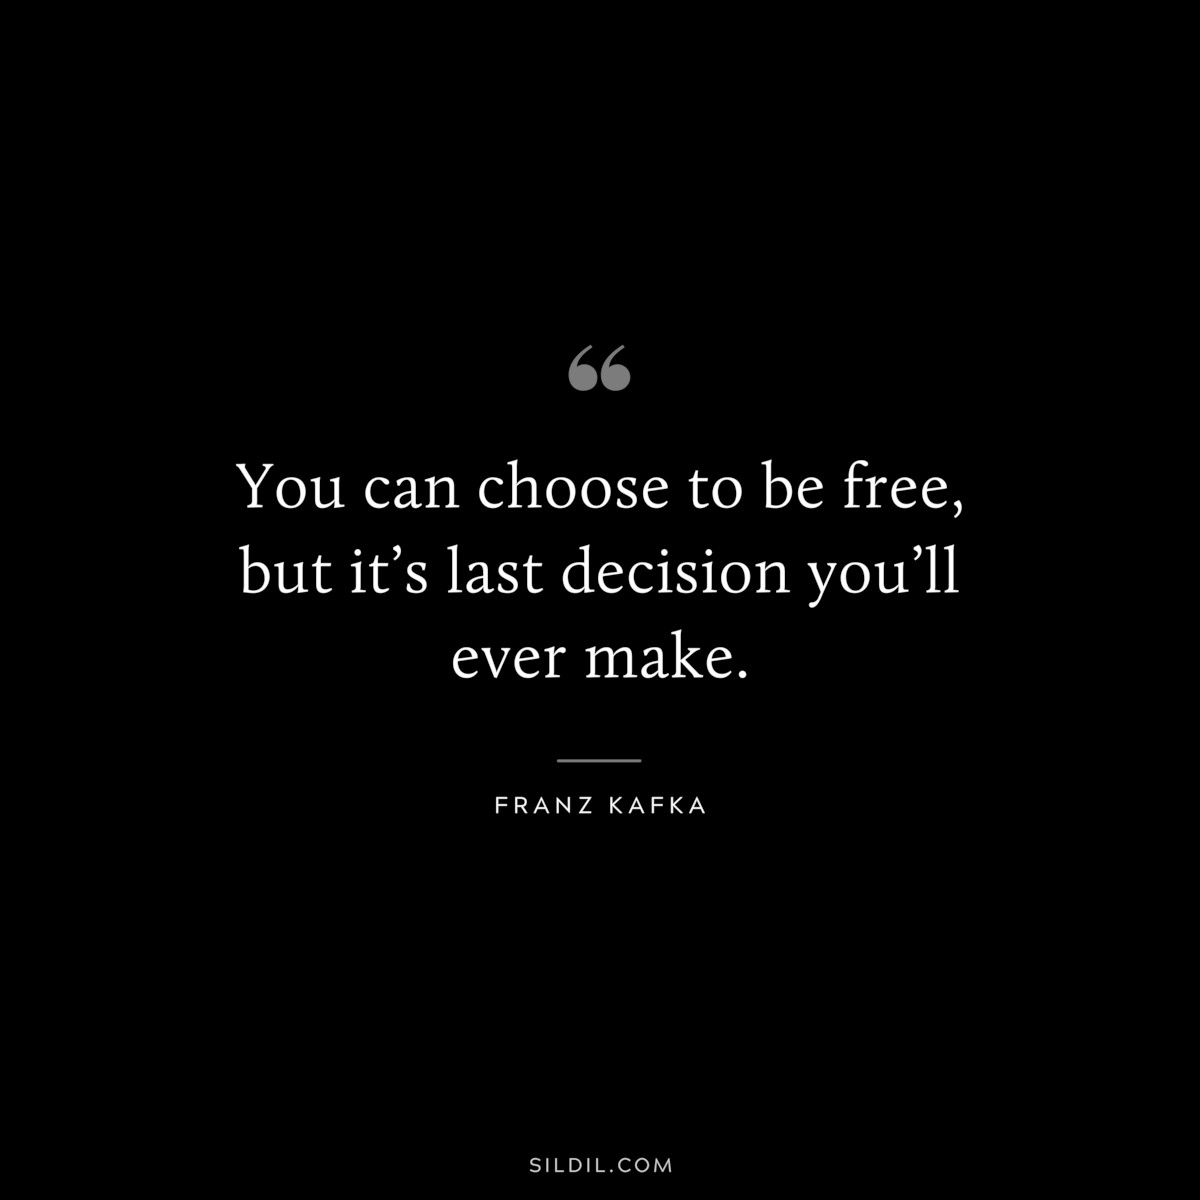 You can choose to be free, but it’s last decision you’ll ever make. ― Franz Kafka